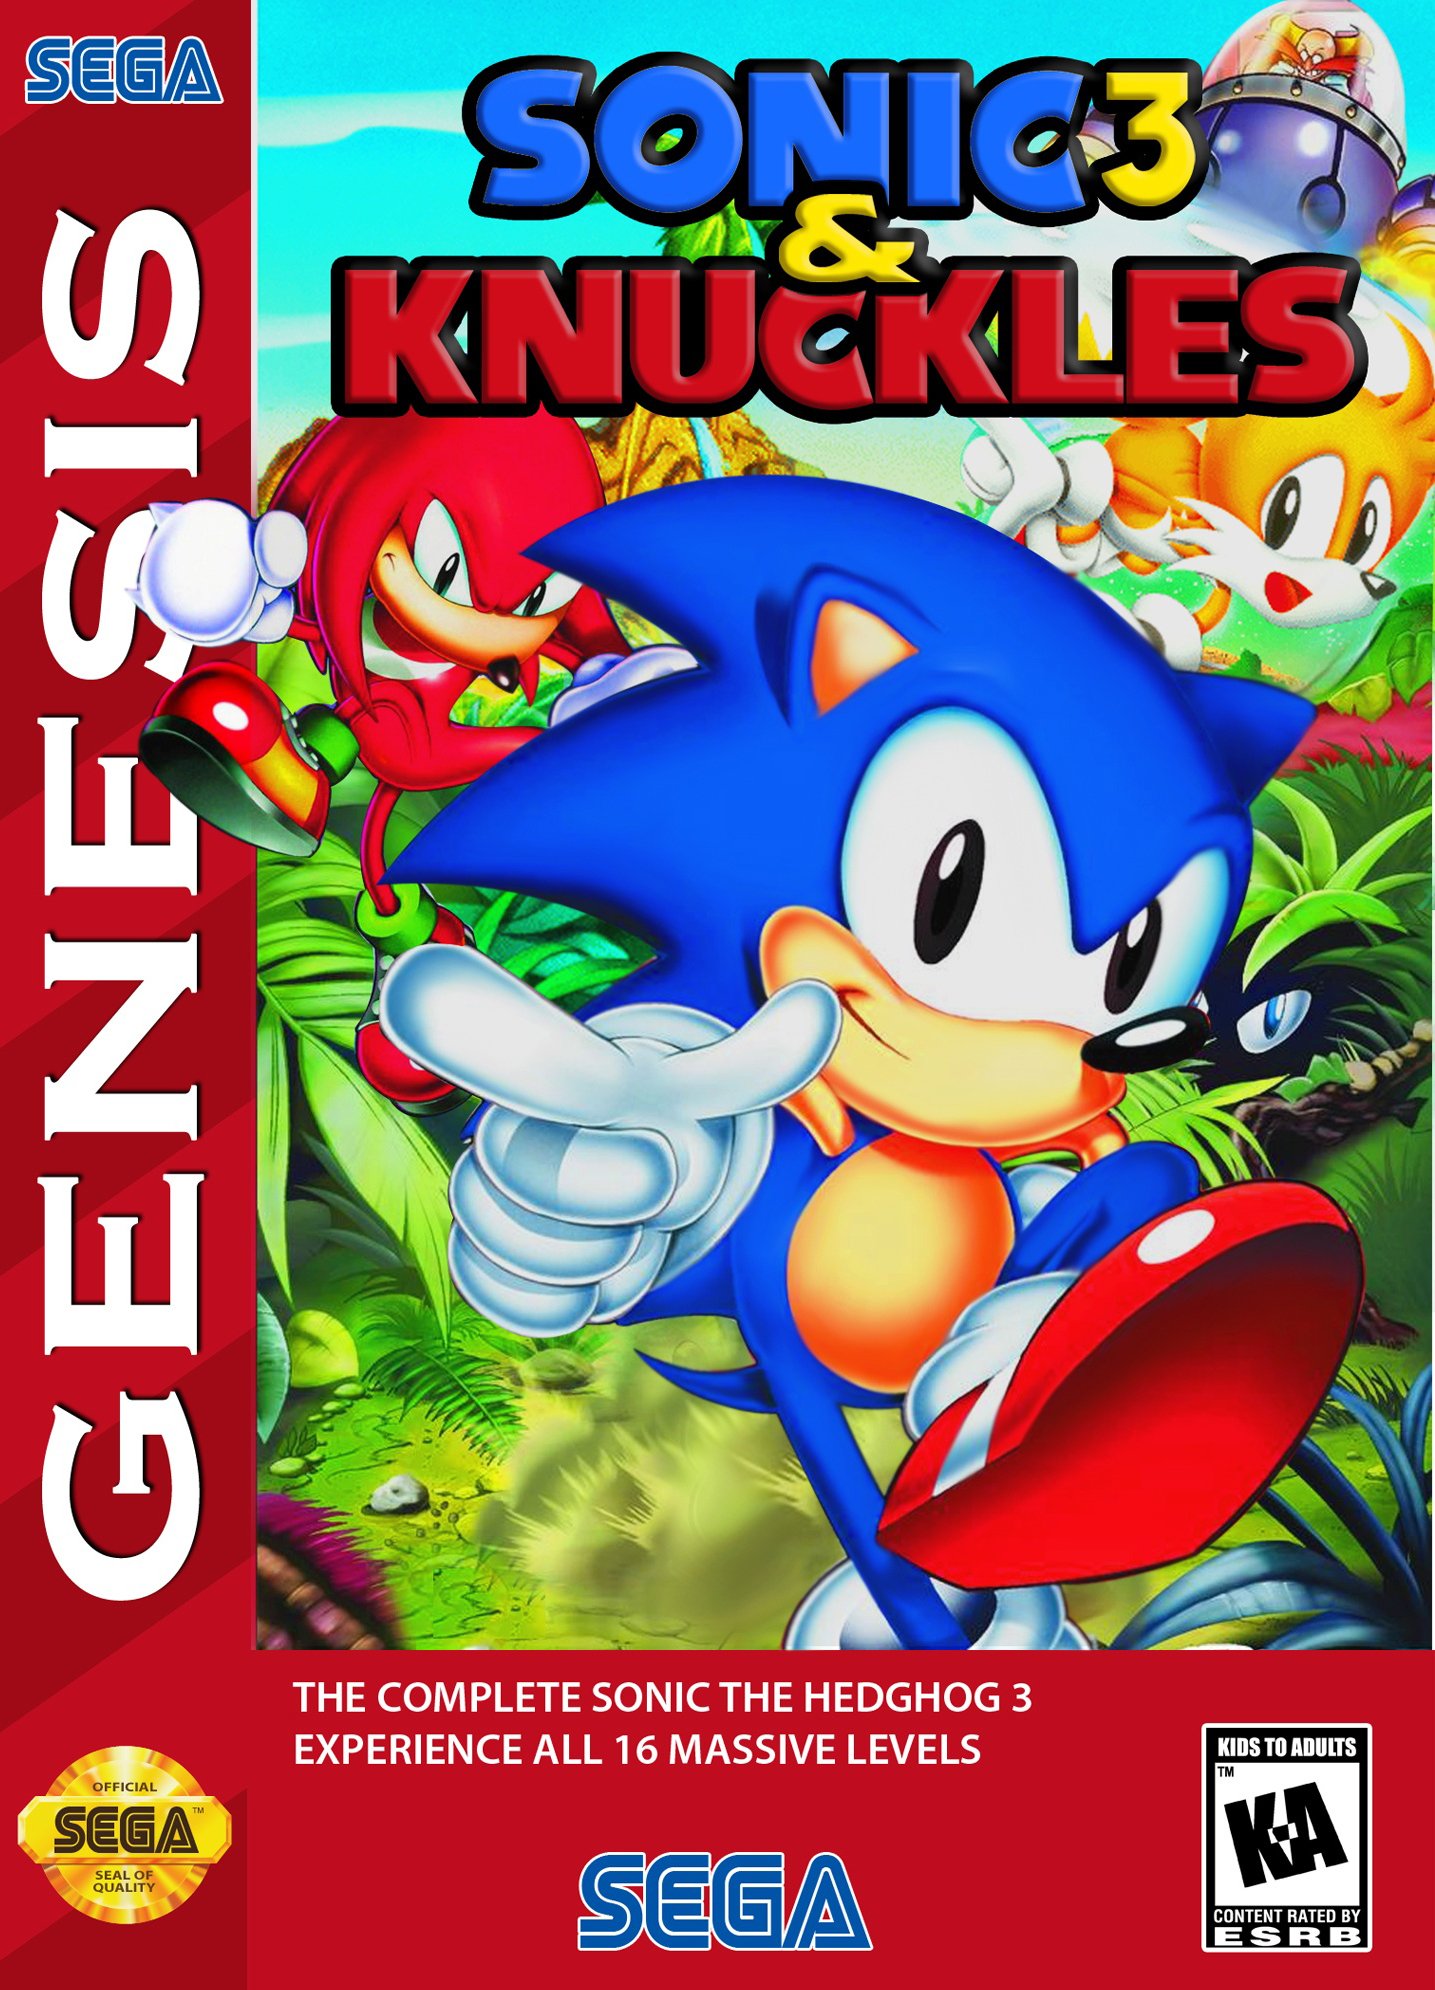 sonic-the-hedgehog-3-knuckles-picture-image-abyss